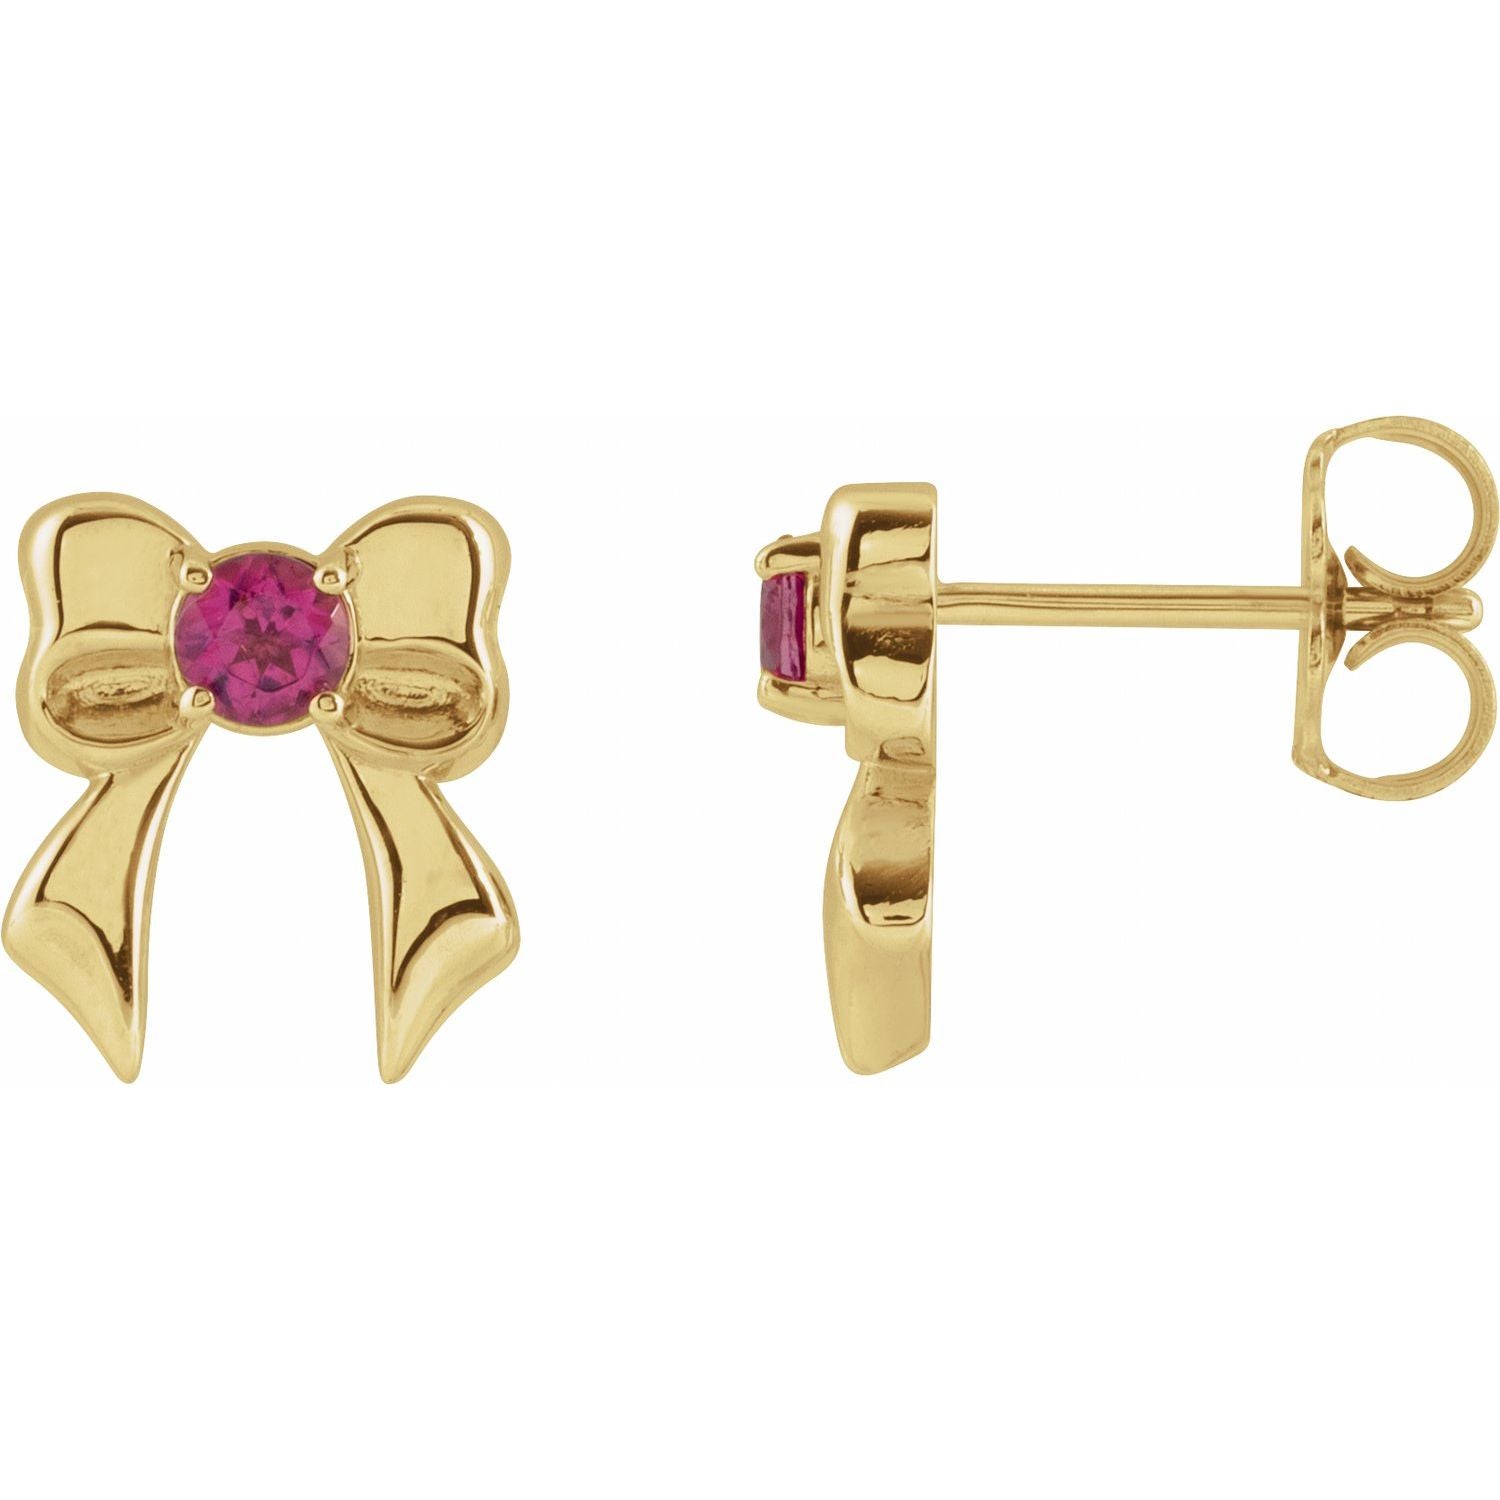 14K Natural Pink Tourmaline Bow Stud Earrings